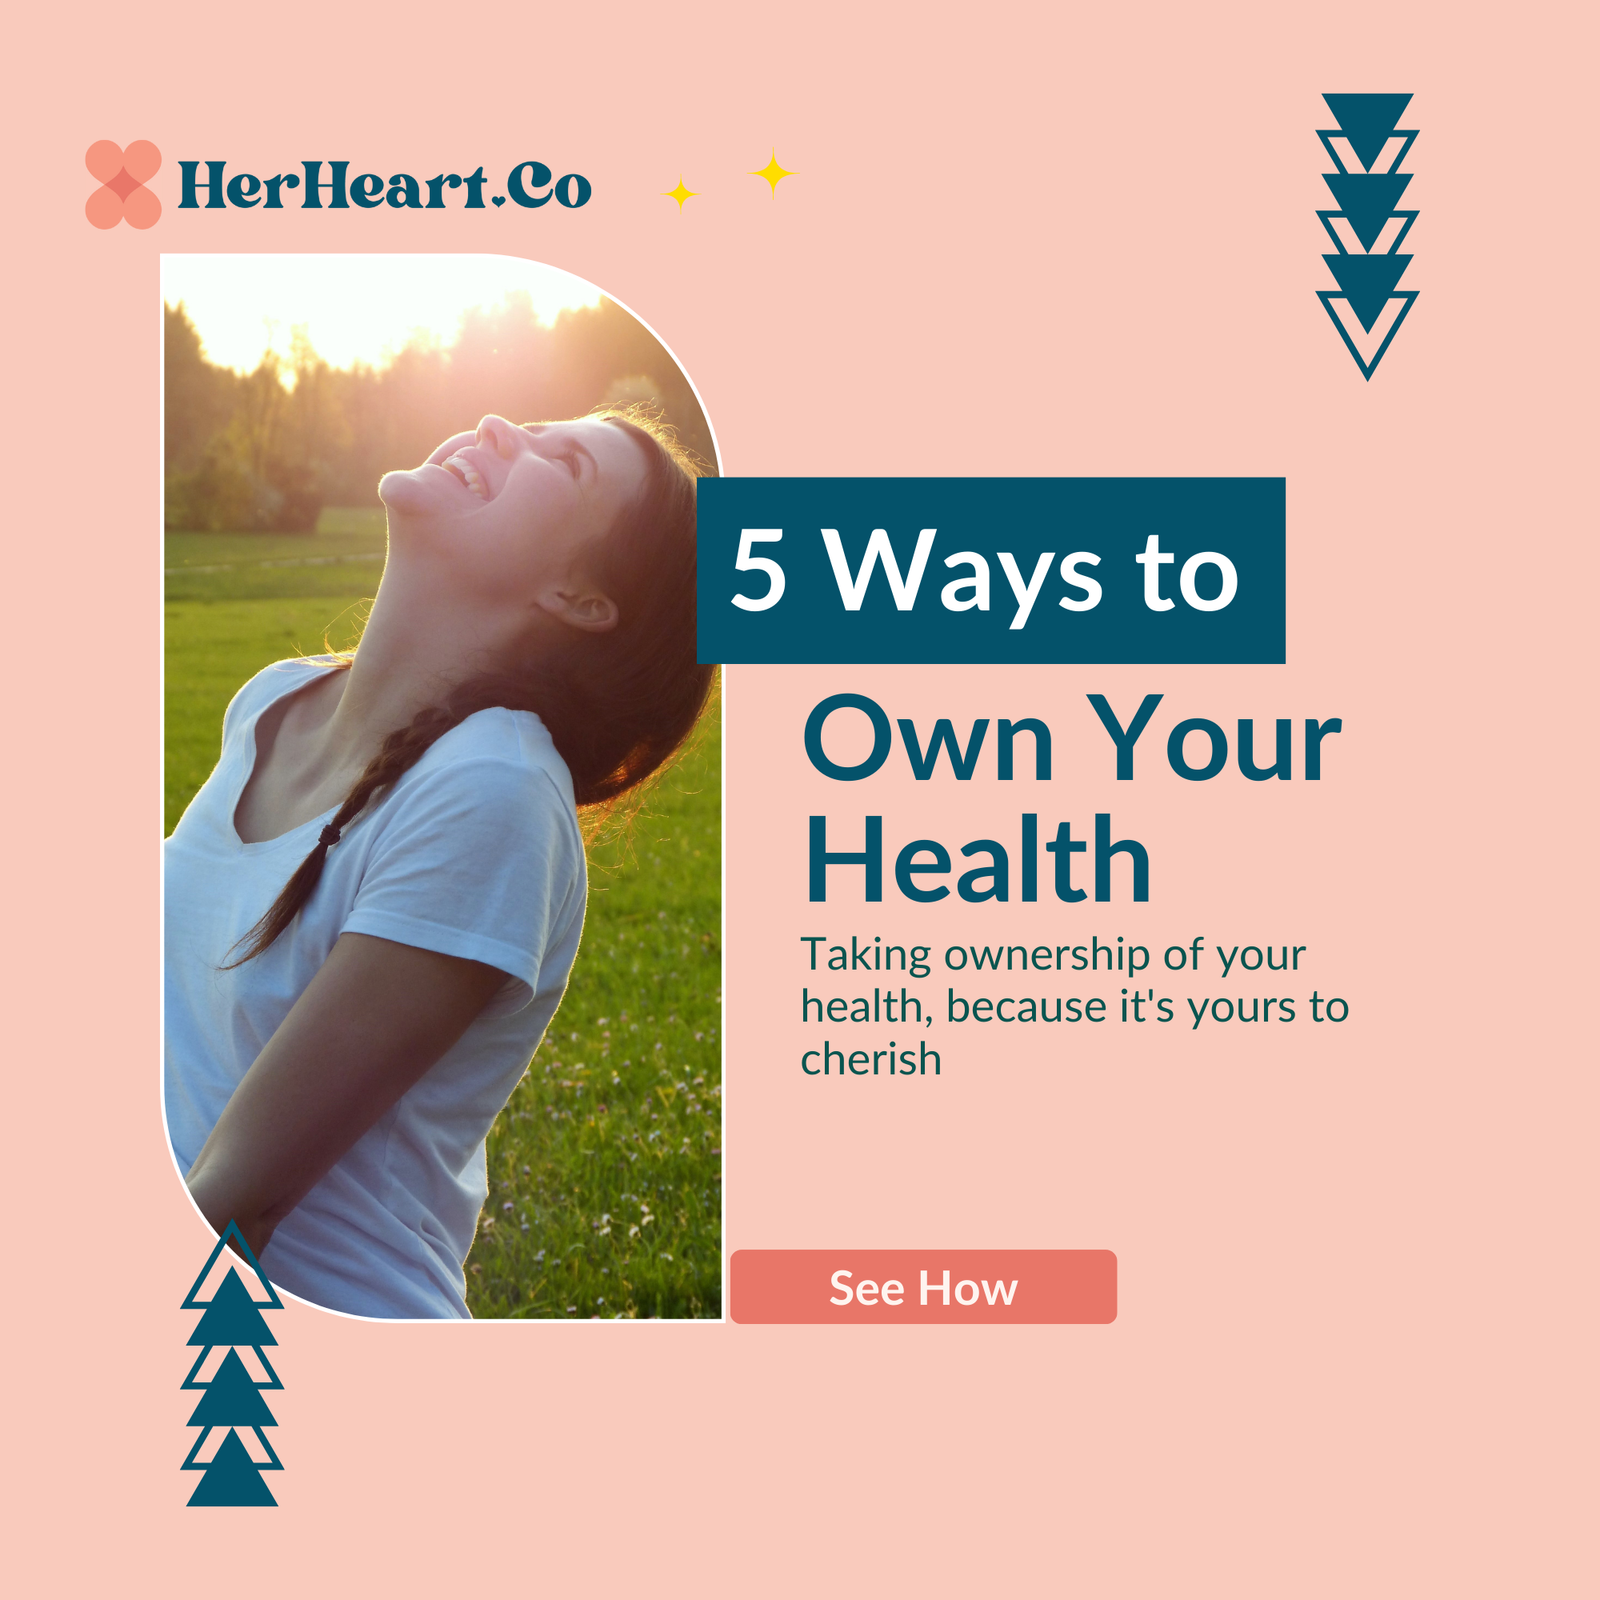 How to own your health?